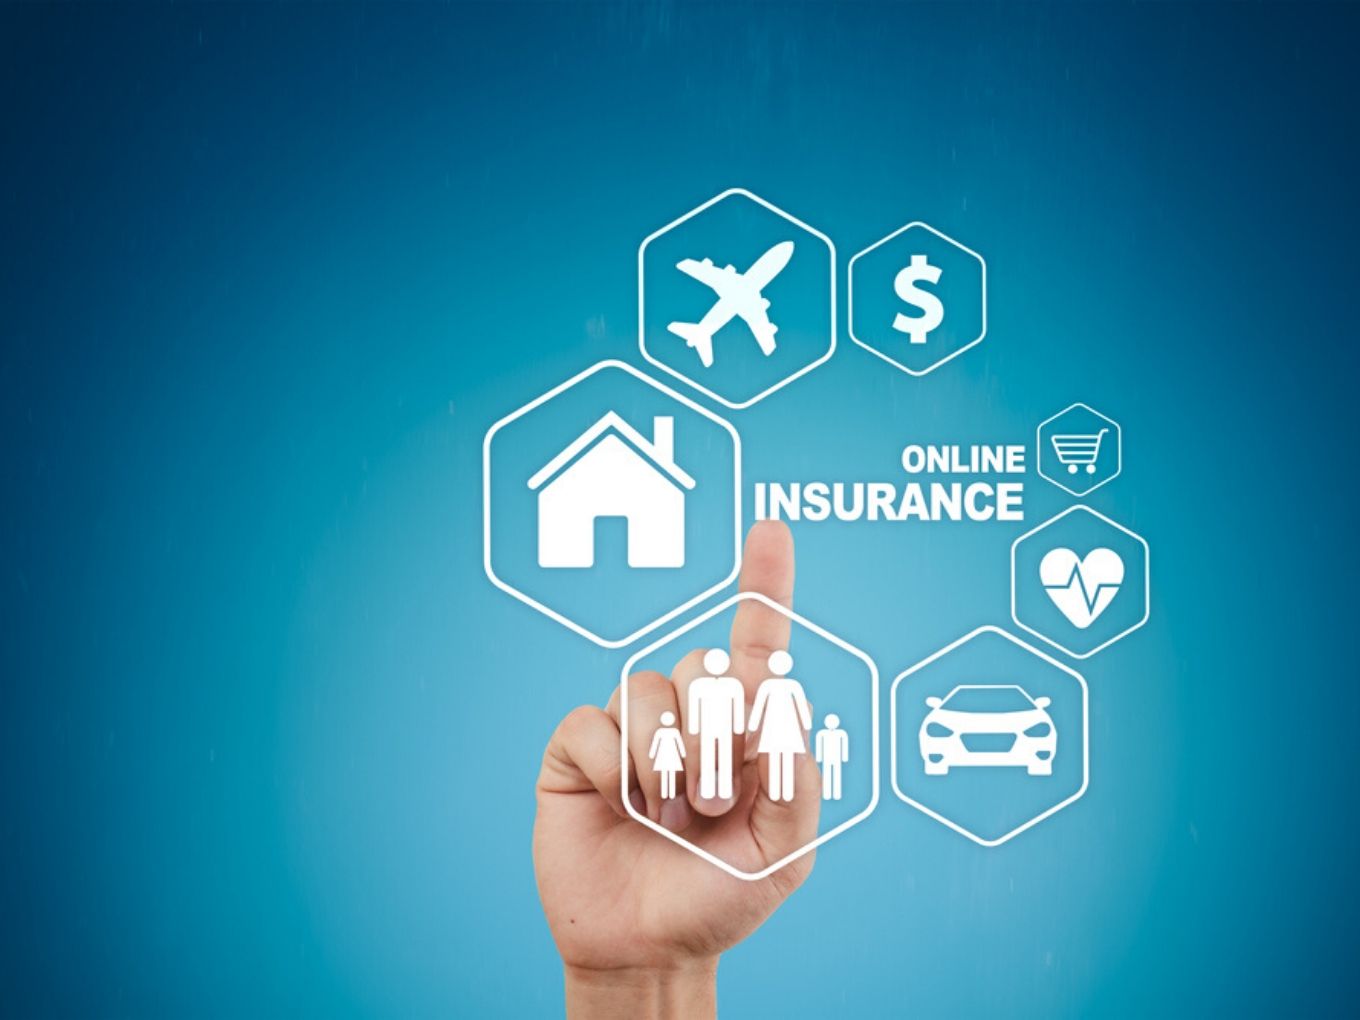 Digit Insurance Bags $84 Mn Funding From A91, TVS Capital